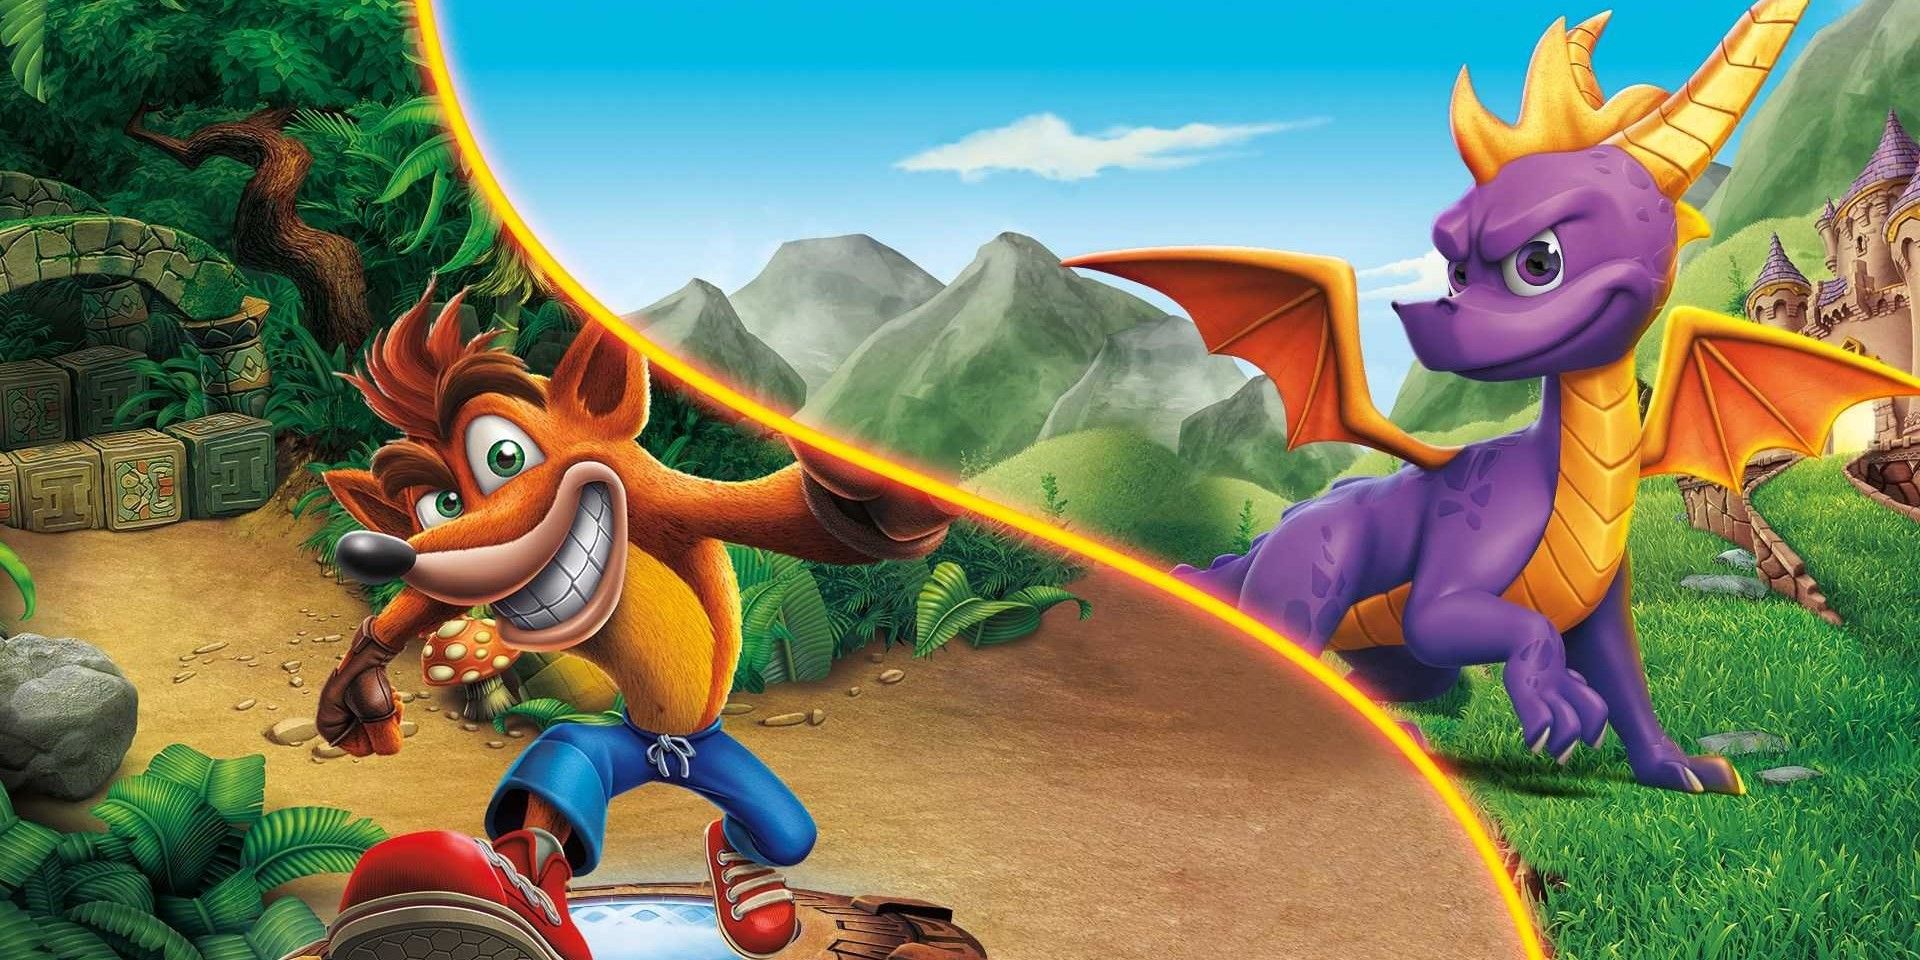 Image of Crash Bandicoot and Spyro the Dragon separated by a wavy amber line.